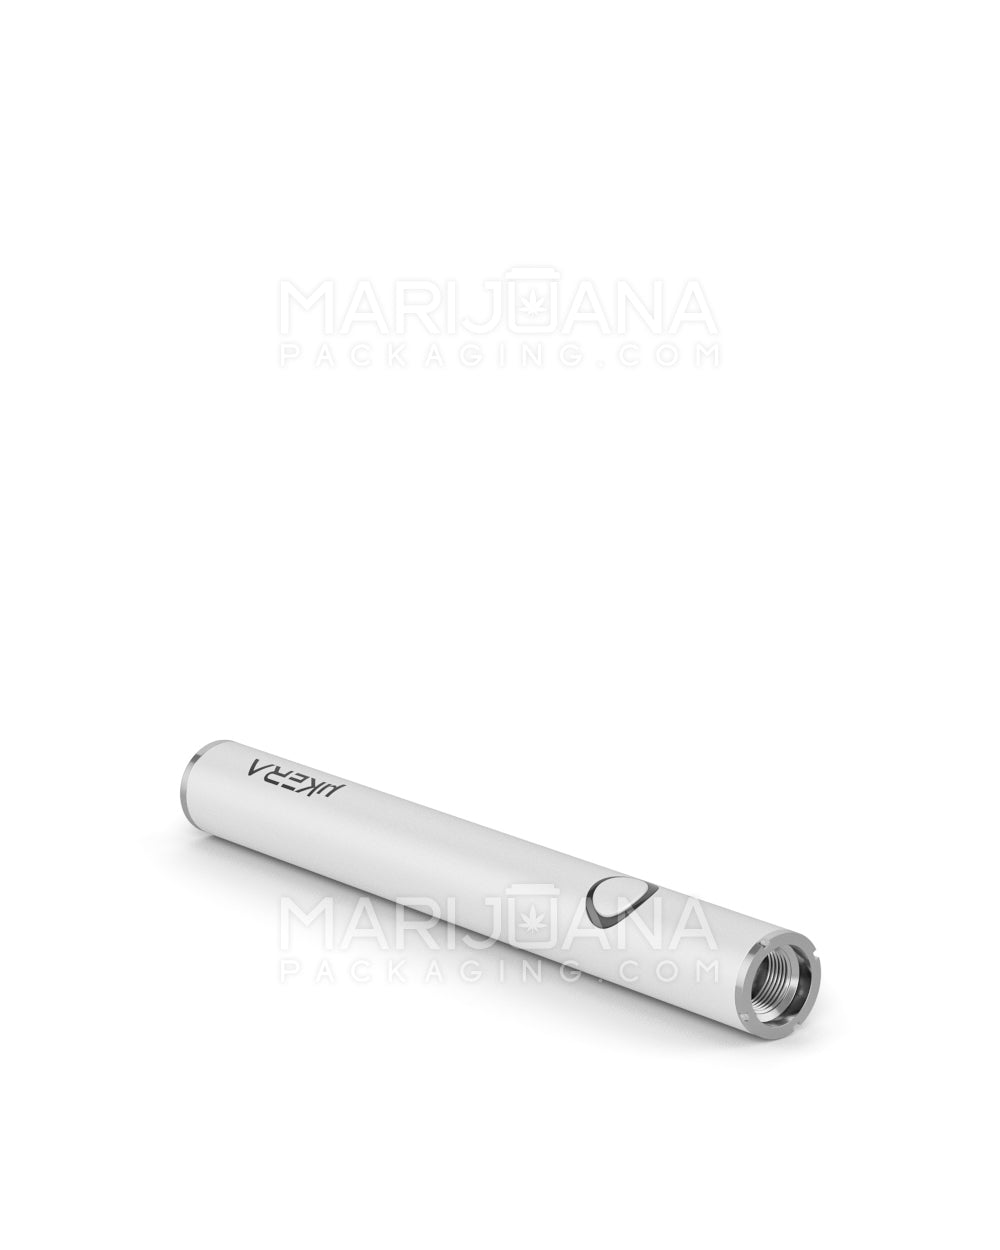 RAE | Variable Voltage Soft Touch Vape Battery | 320mAh - White - 640 Count - 5